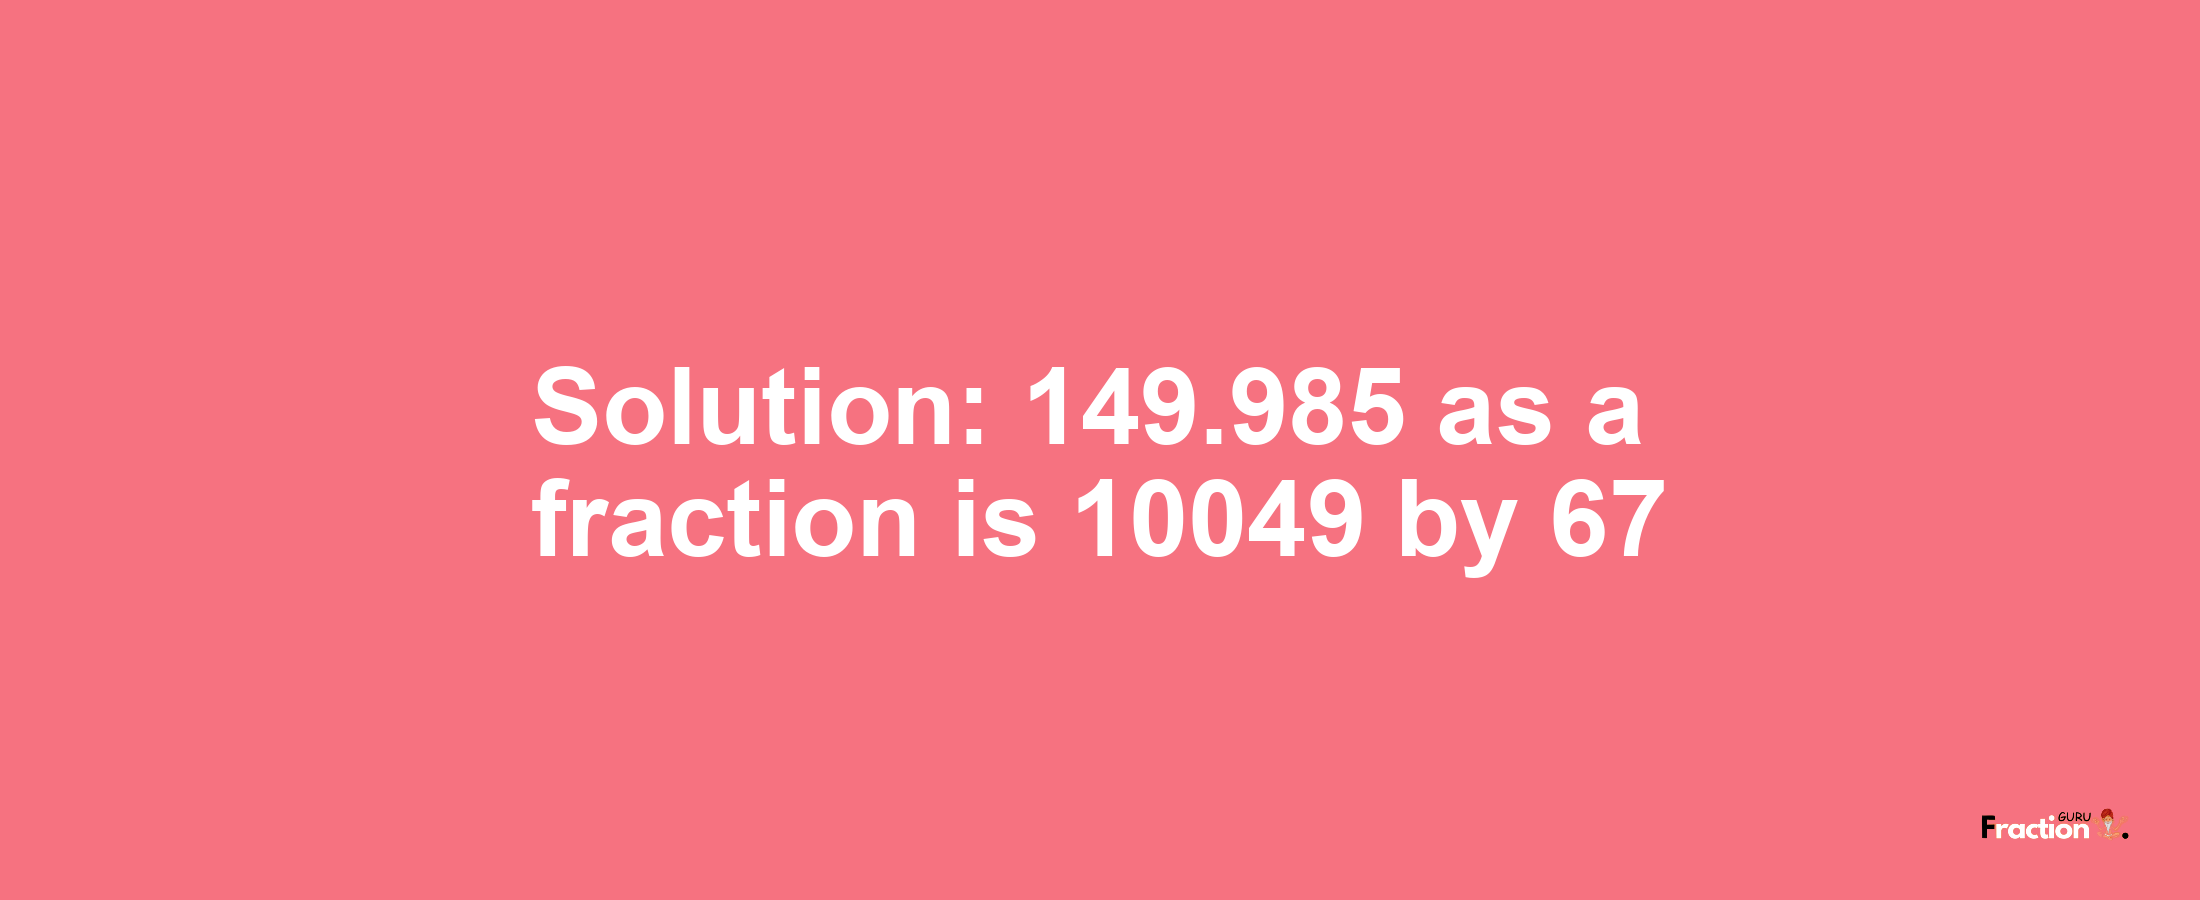 Solution:149.985 as a fraction is 10049/67